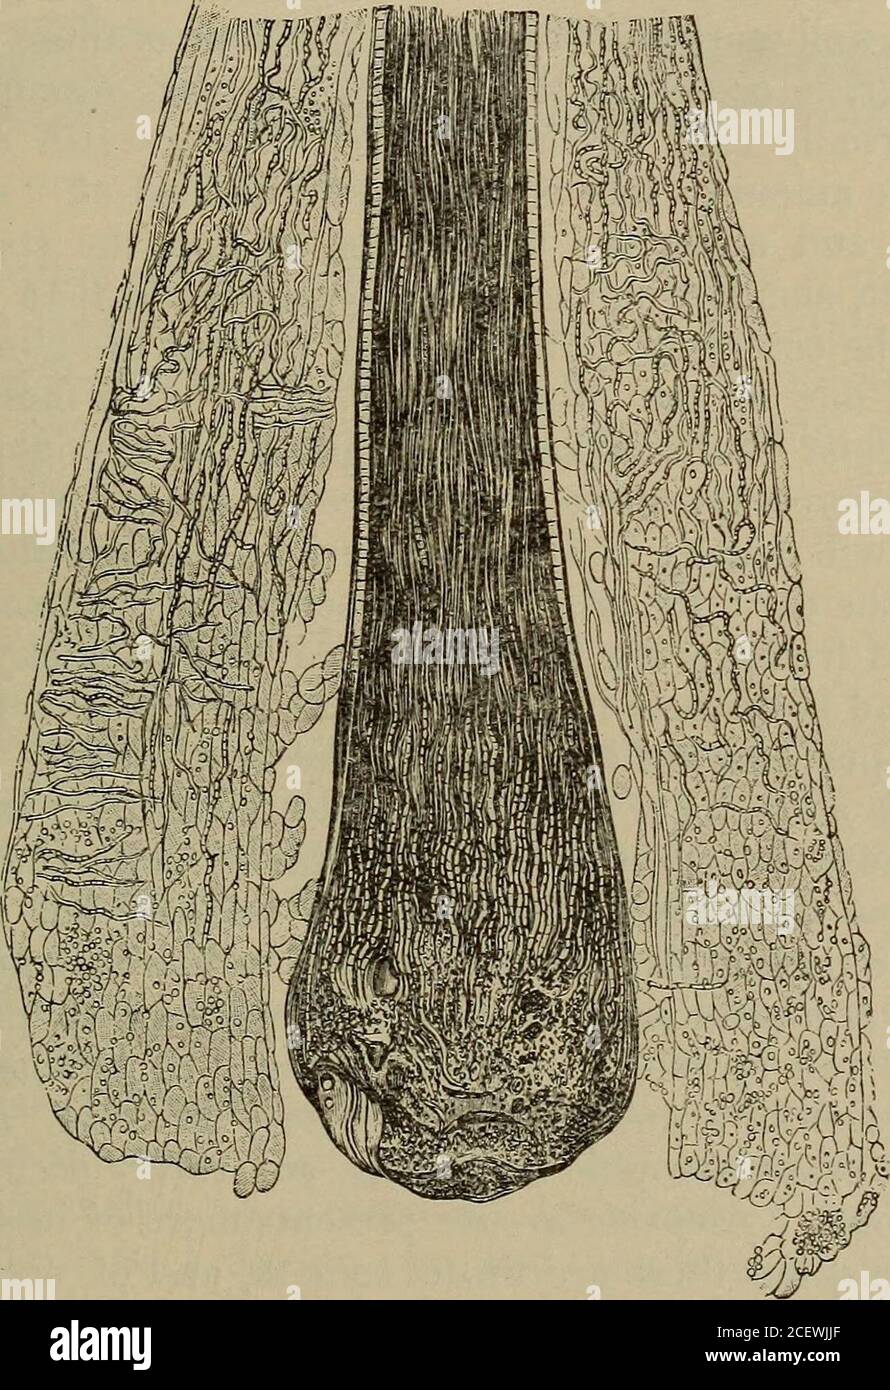 . The ready-reference handbook of diseases of the skin. %Achorlon Schoenleinii. (After Kaposi.) ^ orifices of the hair follicles, and, after remaining there un-disturbed, began to grow in the upper part of the hair sac,and between the superficial layers of the epidermis, andsubsequently invade the hair, growing in its cortical sub-stance. The cup may be formed either by the sinking in ofthe more central portion of the mass, or on account of thecentral portion being attached to the hair so firmly that itcannot so readily give way and bow out under the pressureof the growing fungus as do the par Stock Photo